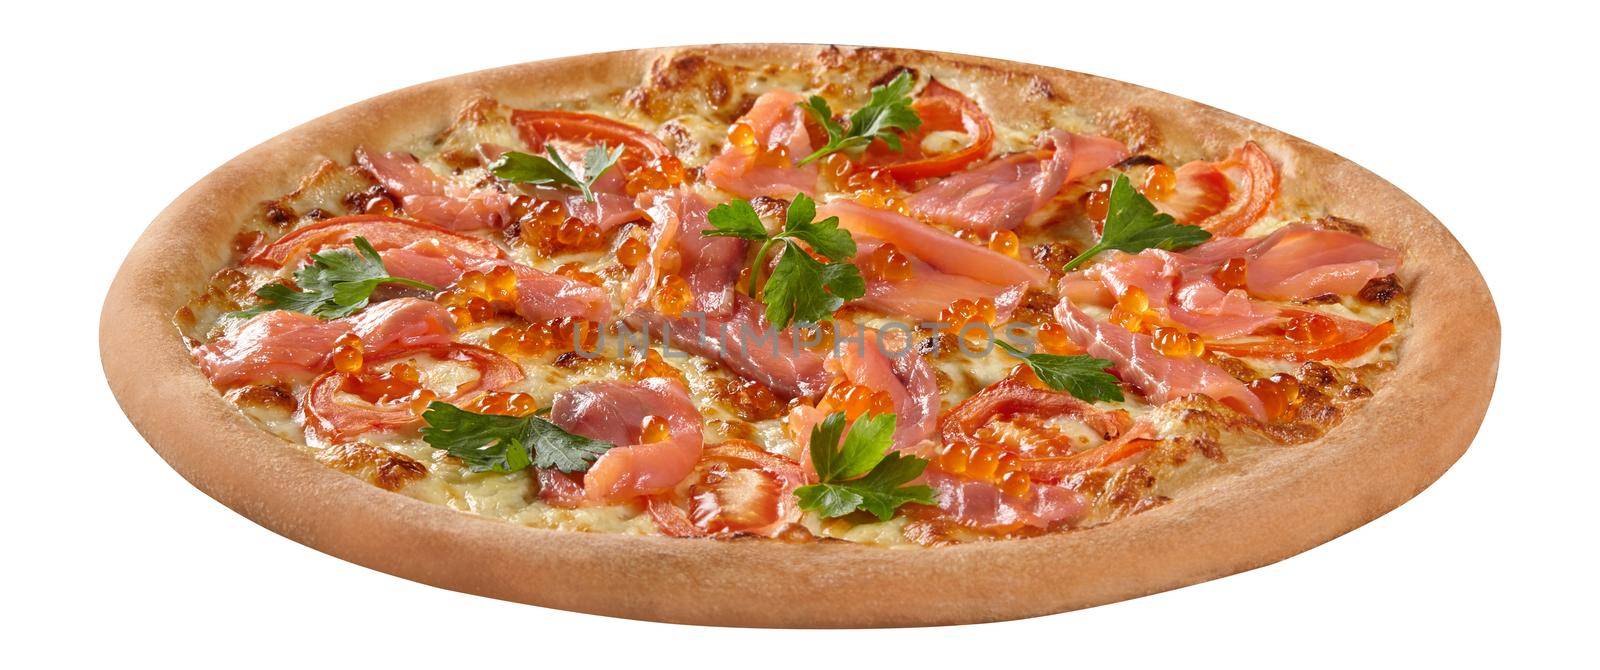 Pizza with smoked salmon, red caviar, cream cheese sauce, melted mozzarella and tomatoes by nazarovsergey